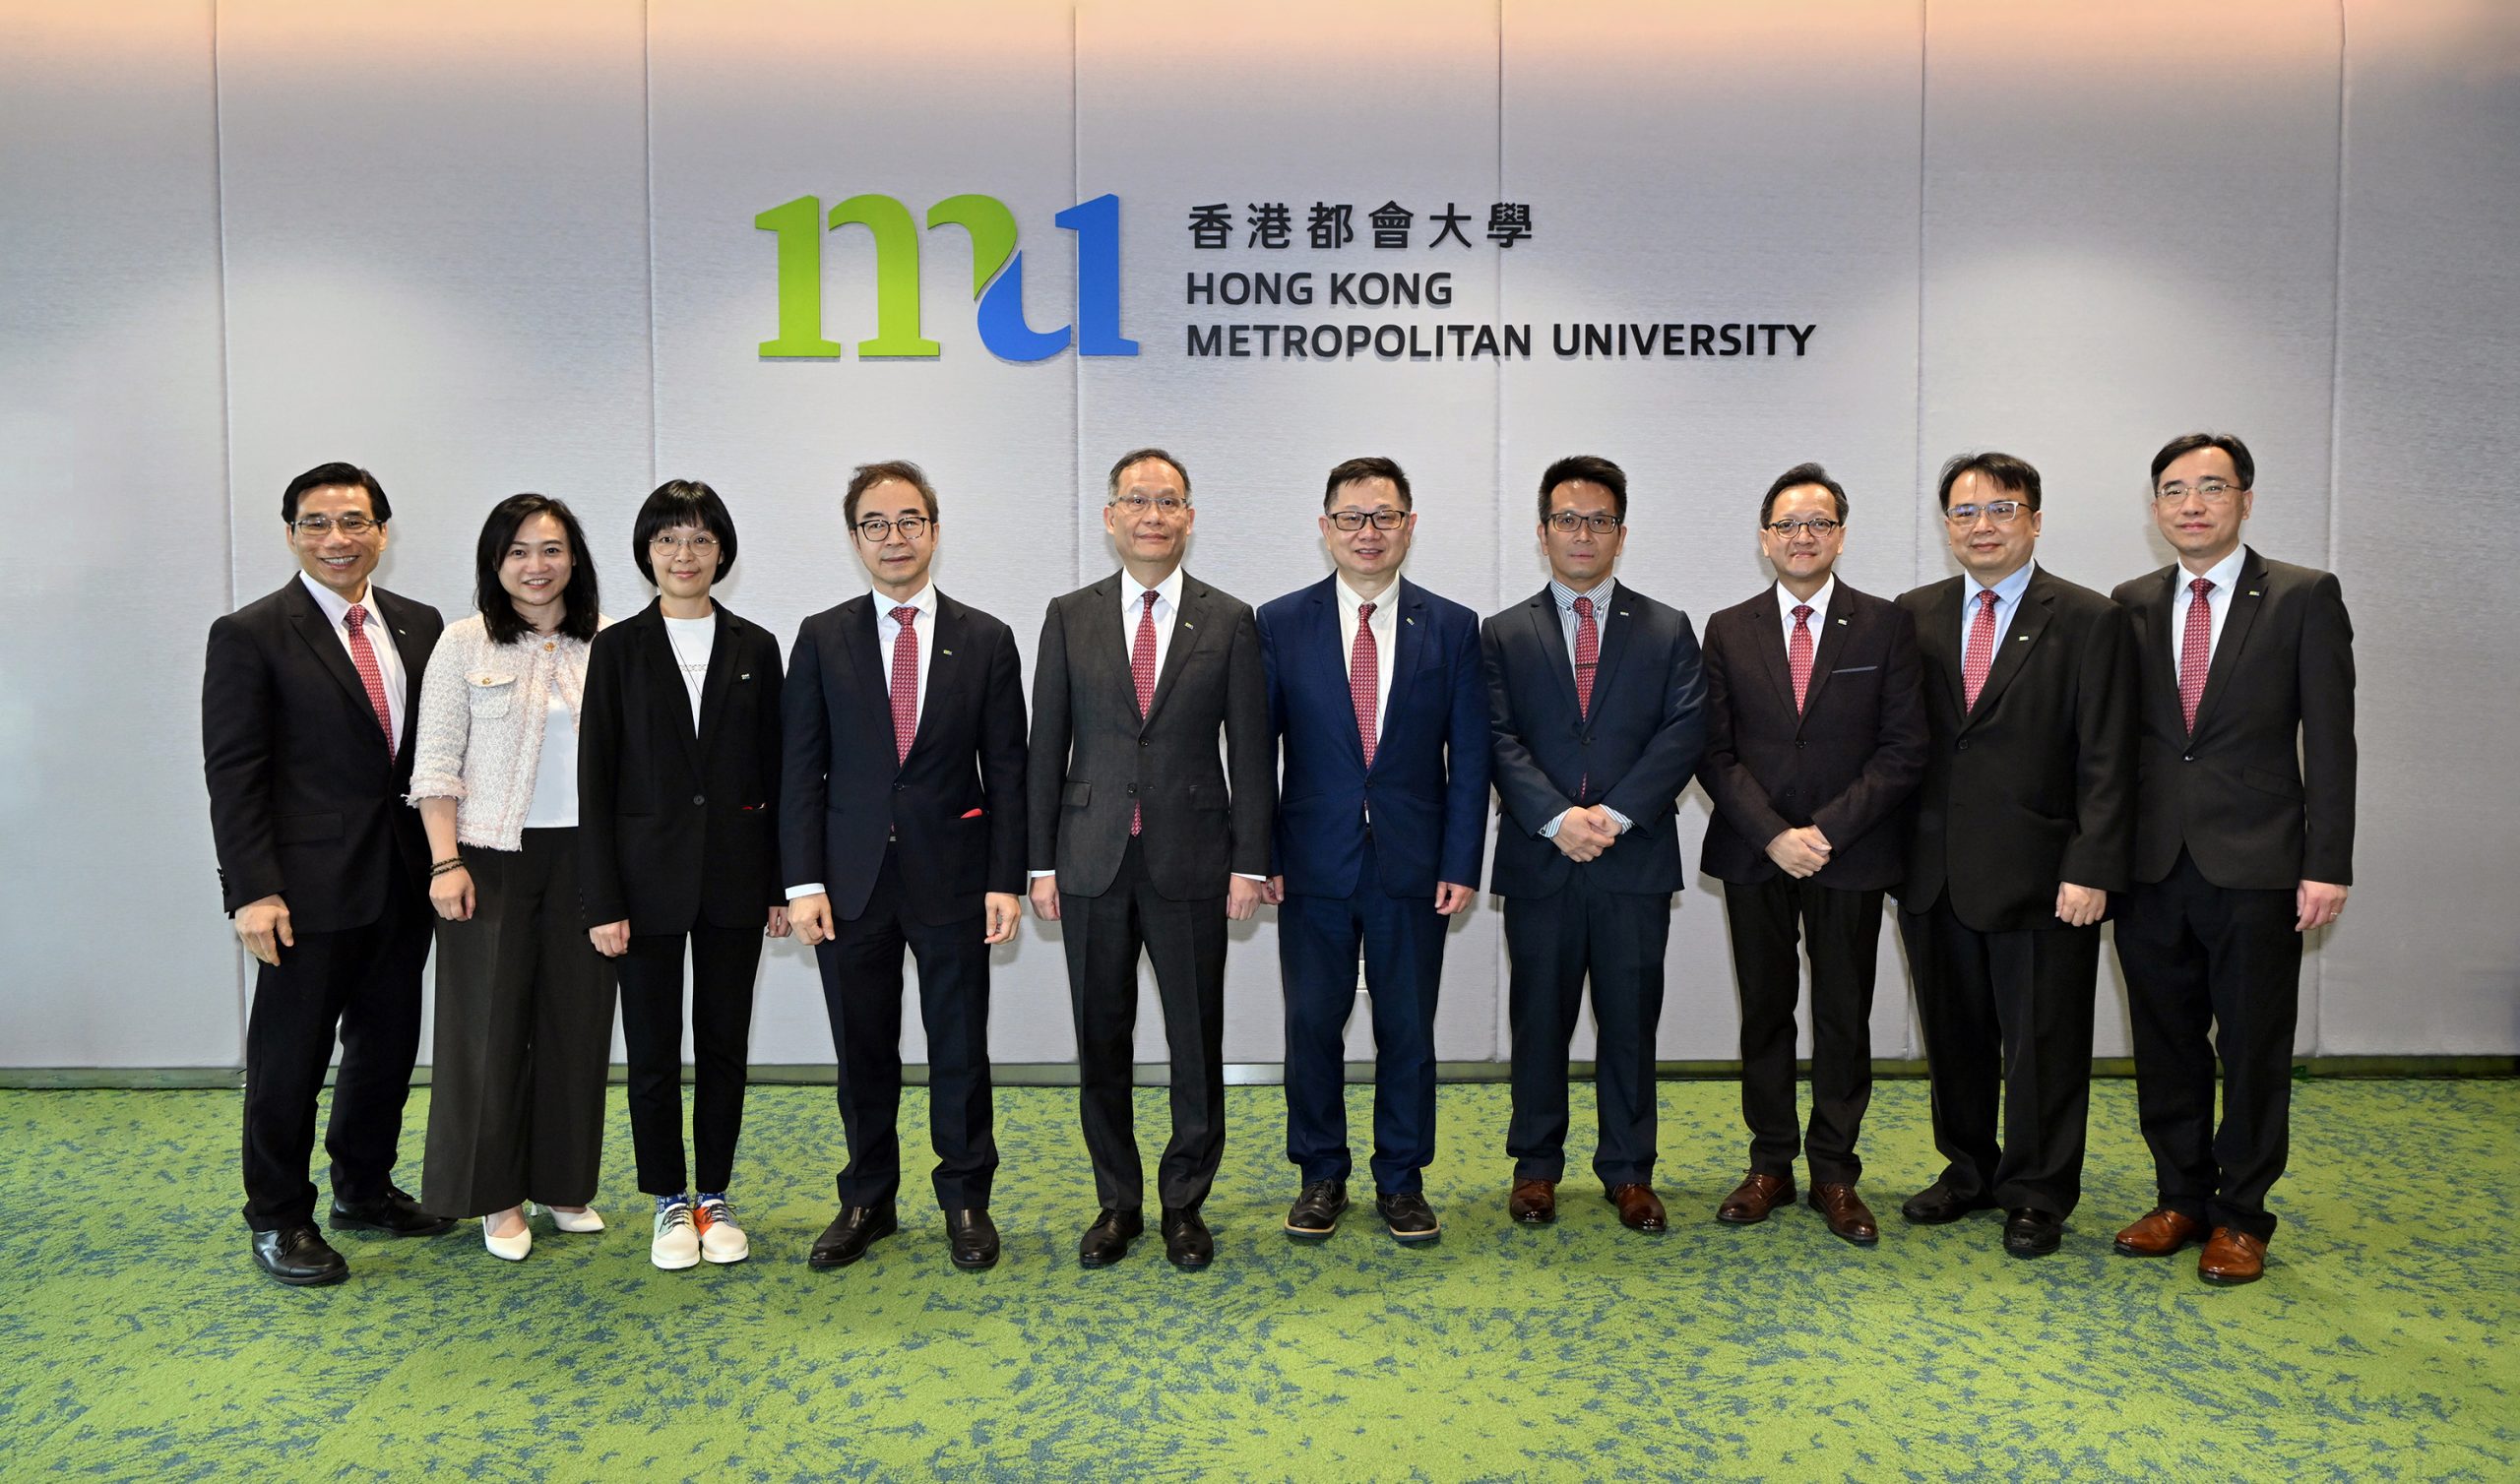 Hong Kong Metropolitan University holds a gathering with the media today (8 February). President Prof. Paul Lam Kwan-sing takes a group photo with Provost, Vice Presidents and Deans of different Schools.